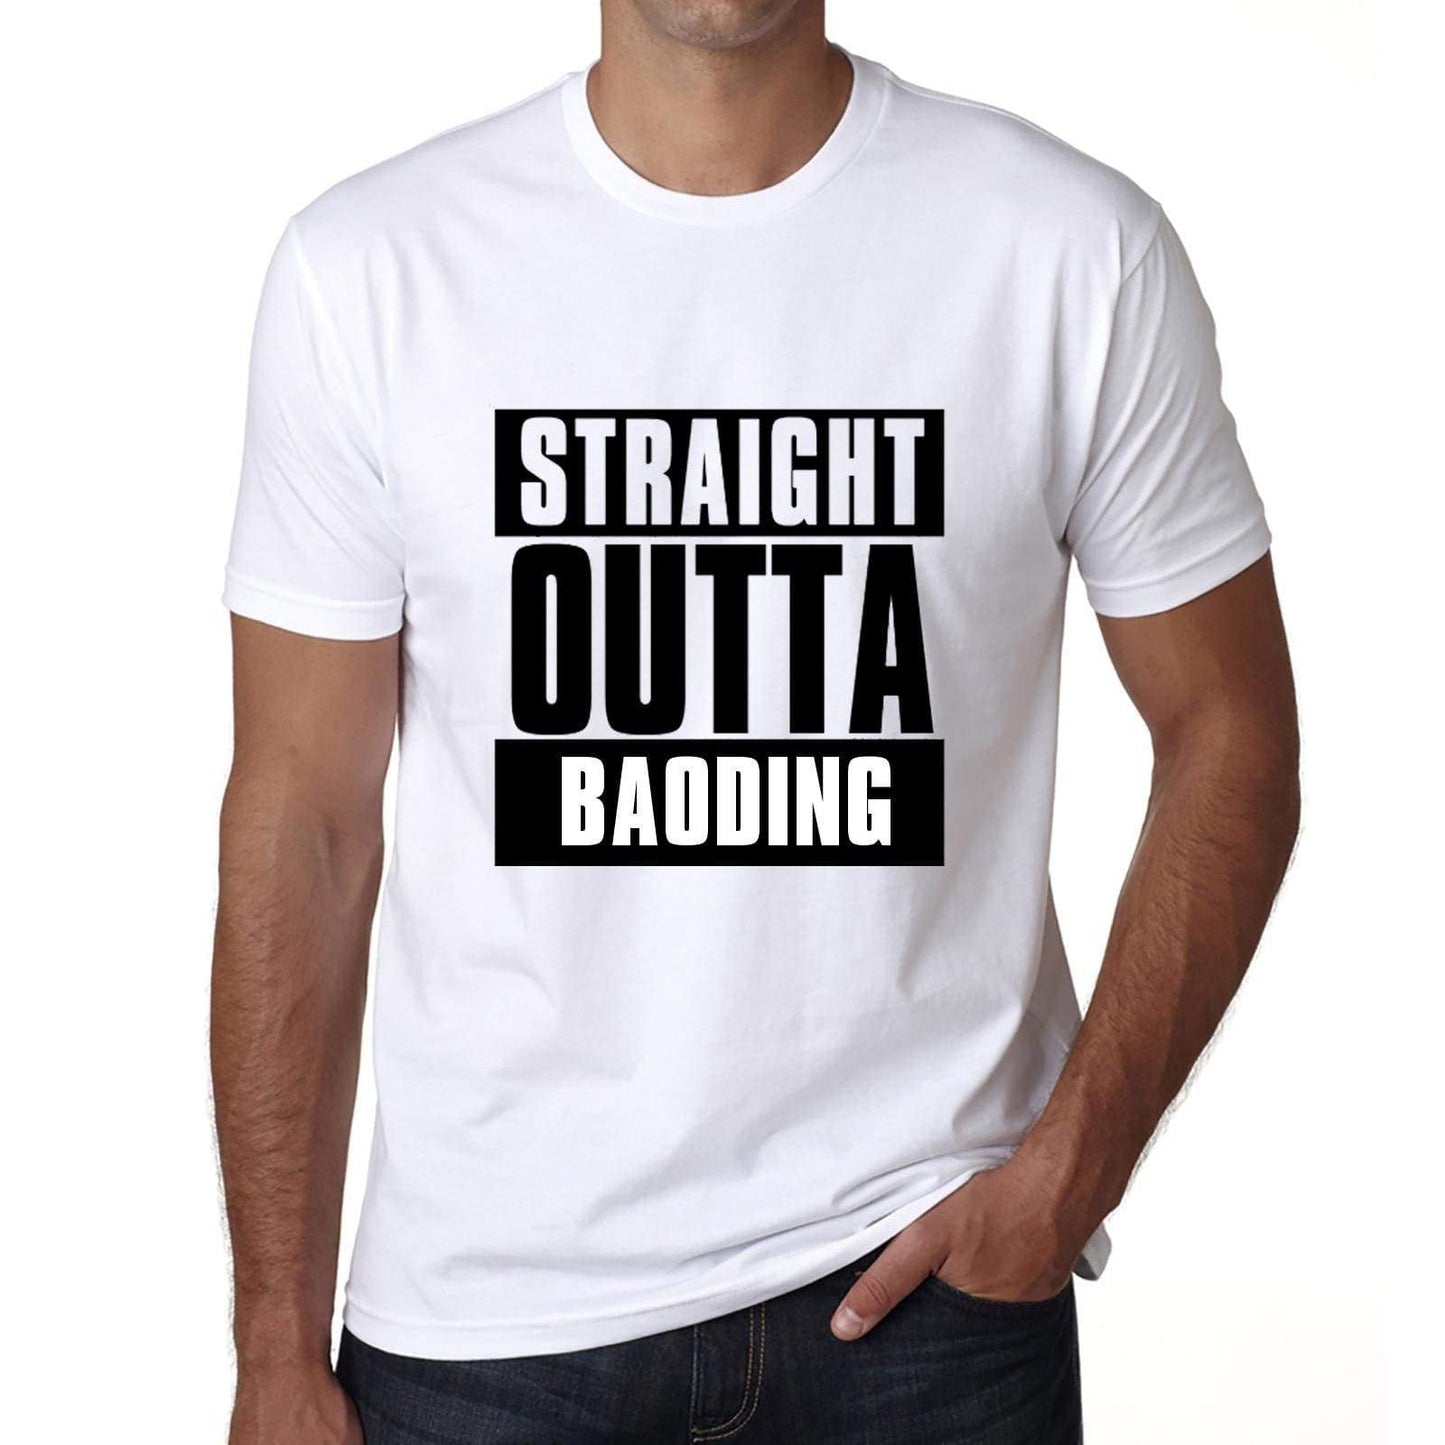 Straight Outta Baoding Mens Short Sleeve Round Neck T-Shirt 00027 - White / S - Casual